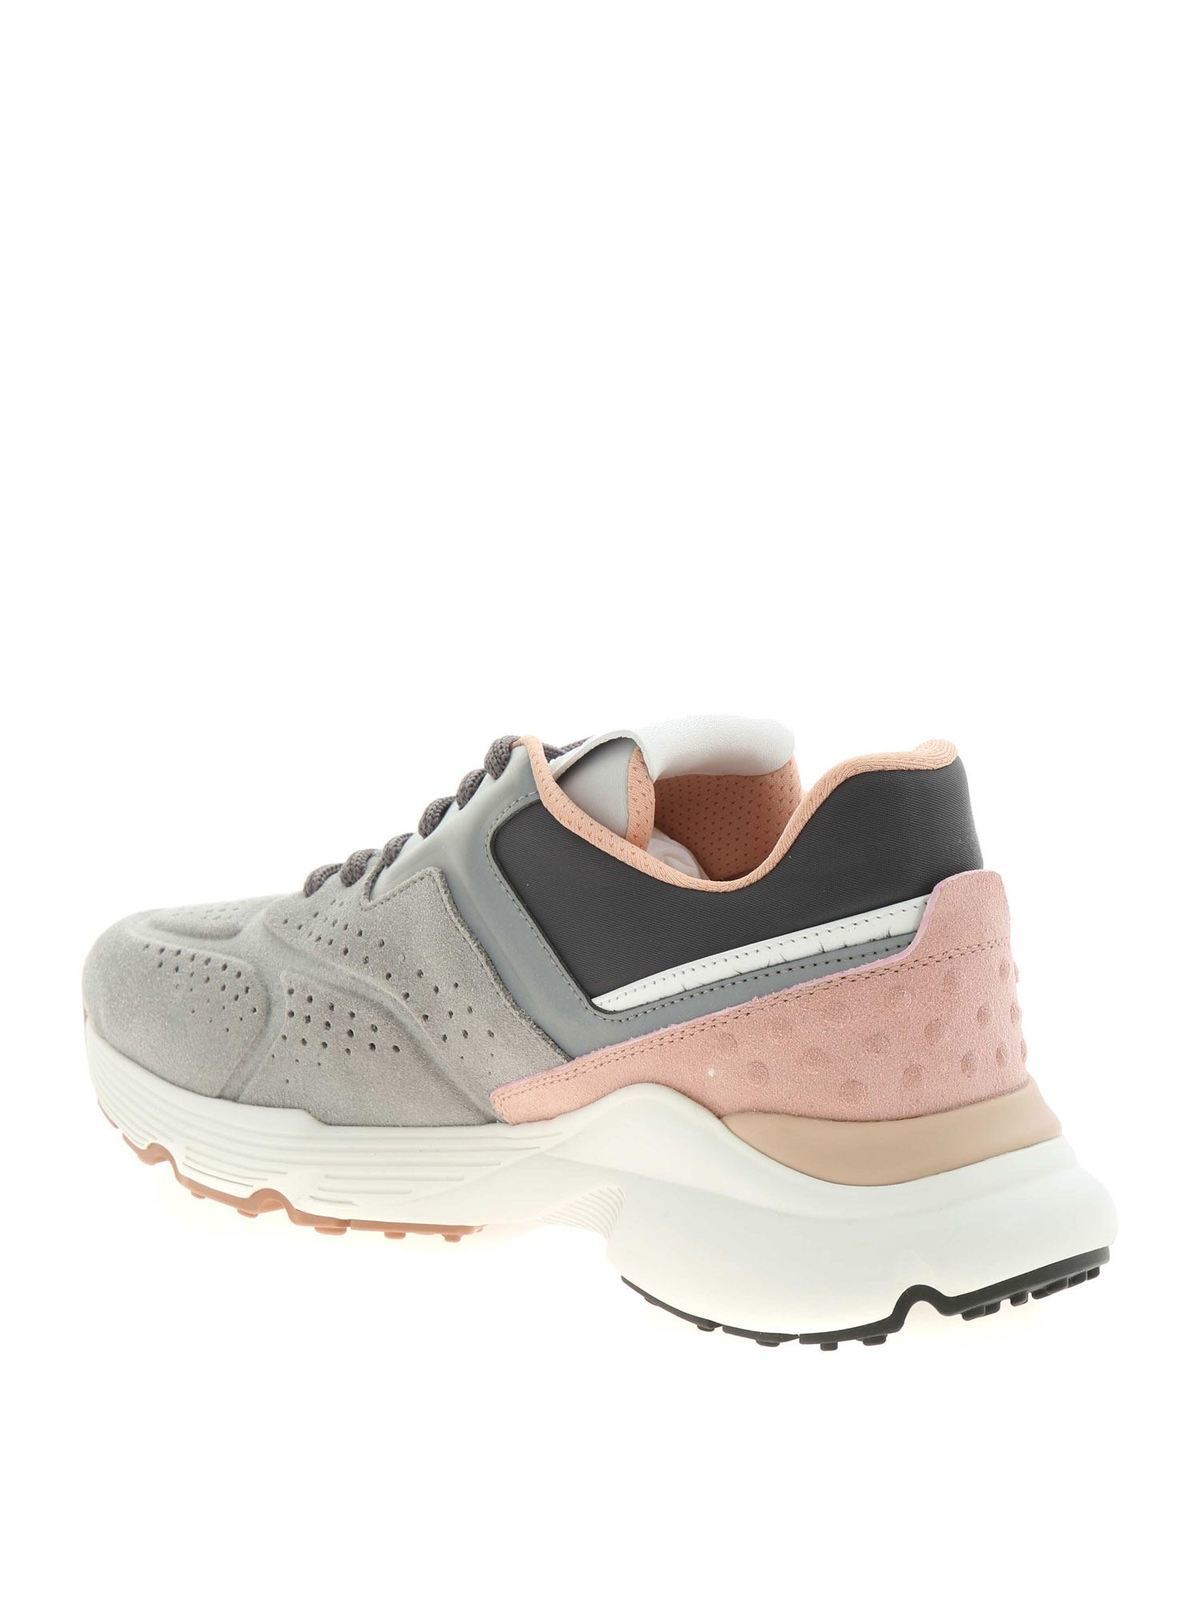 Baby bitter Accepteret Trainers Tod's - Run 54C sneakers in gray and pink - XXW54C0EF41PY7LL01